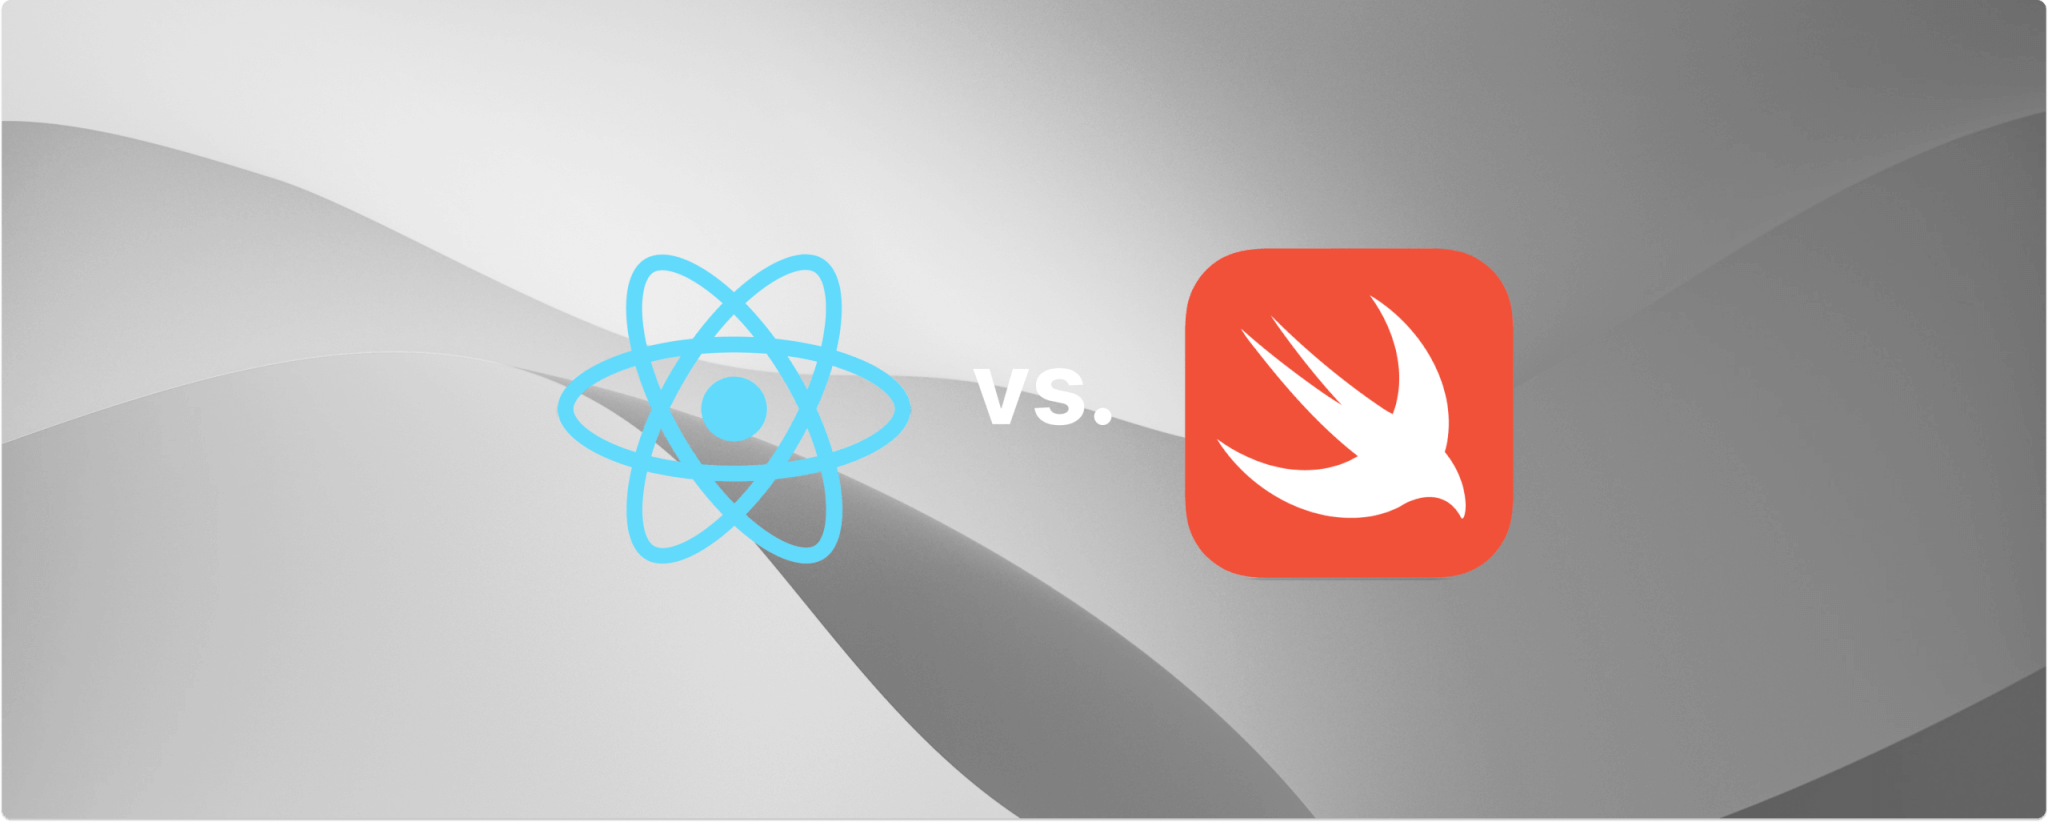 "React Native vs Swift: Which One to Choose in 2022 for an iOS Mobile Development?"